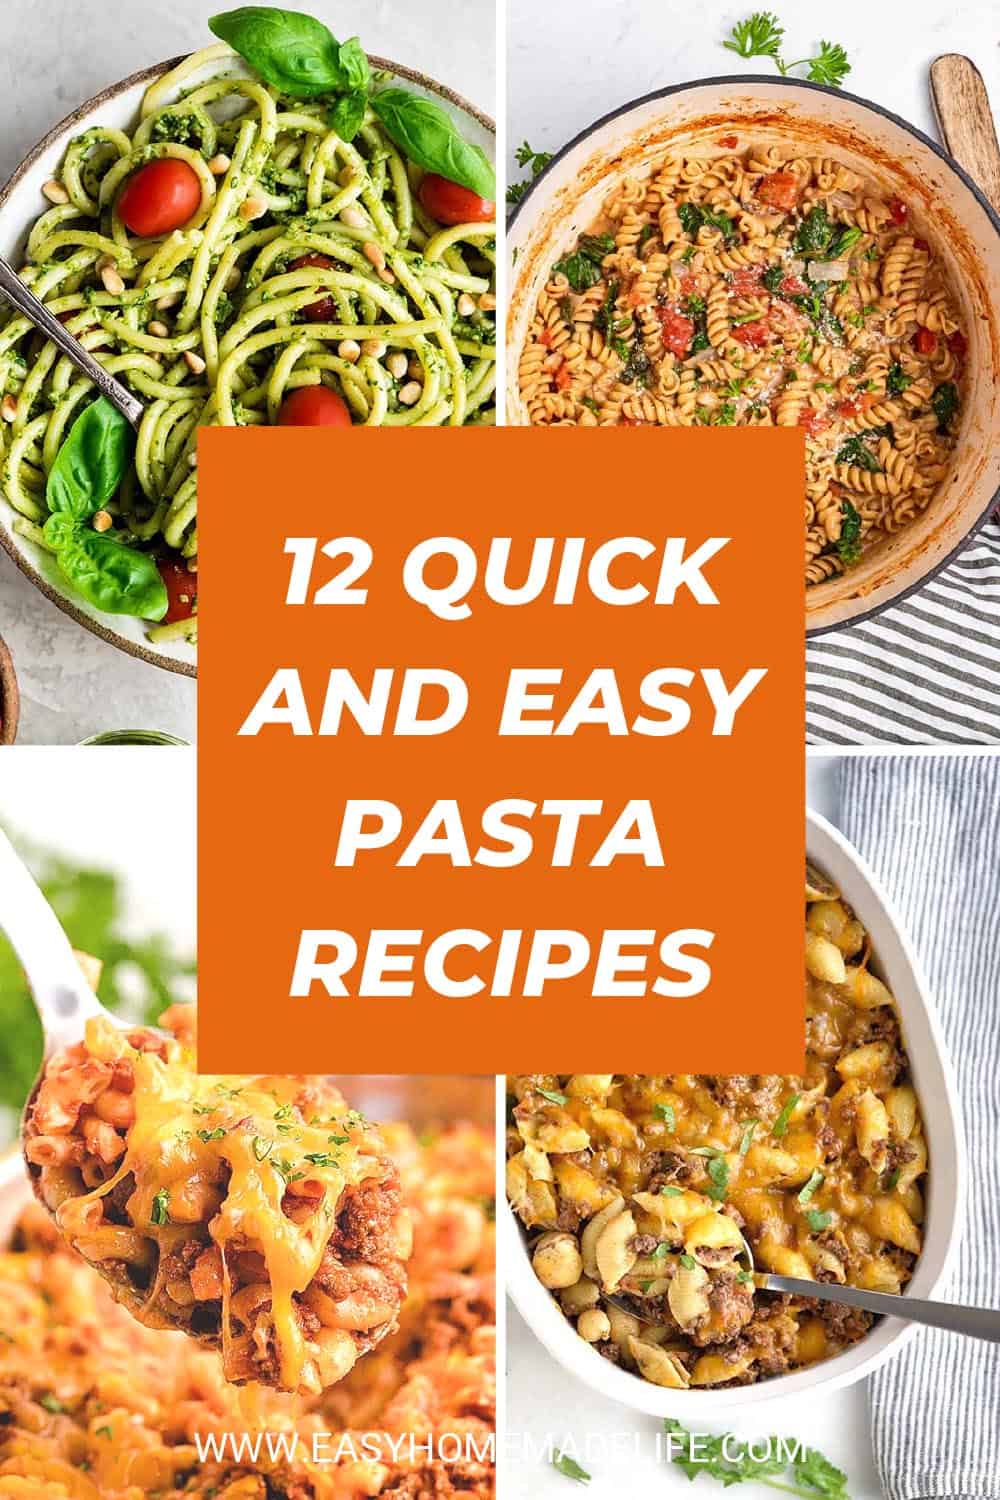 12-quick-and-easy-pasta-recipes-with-few-ingredients